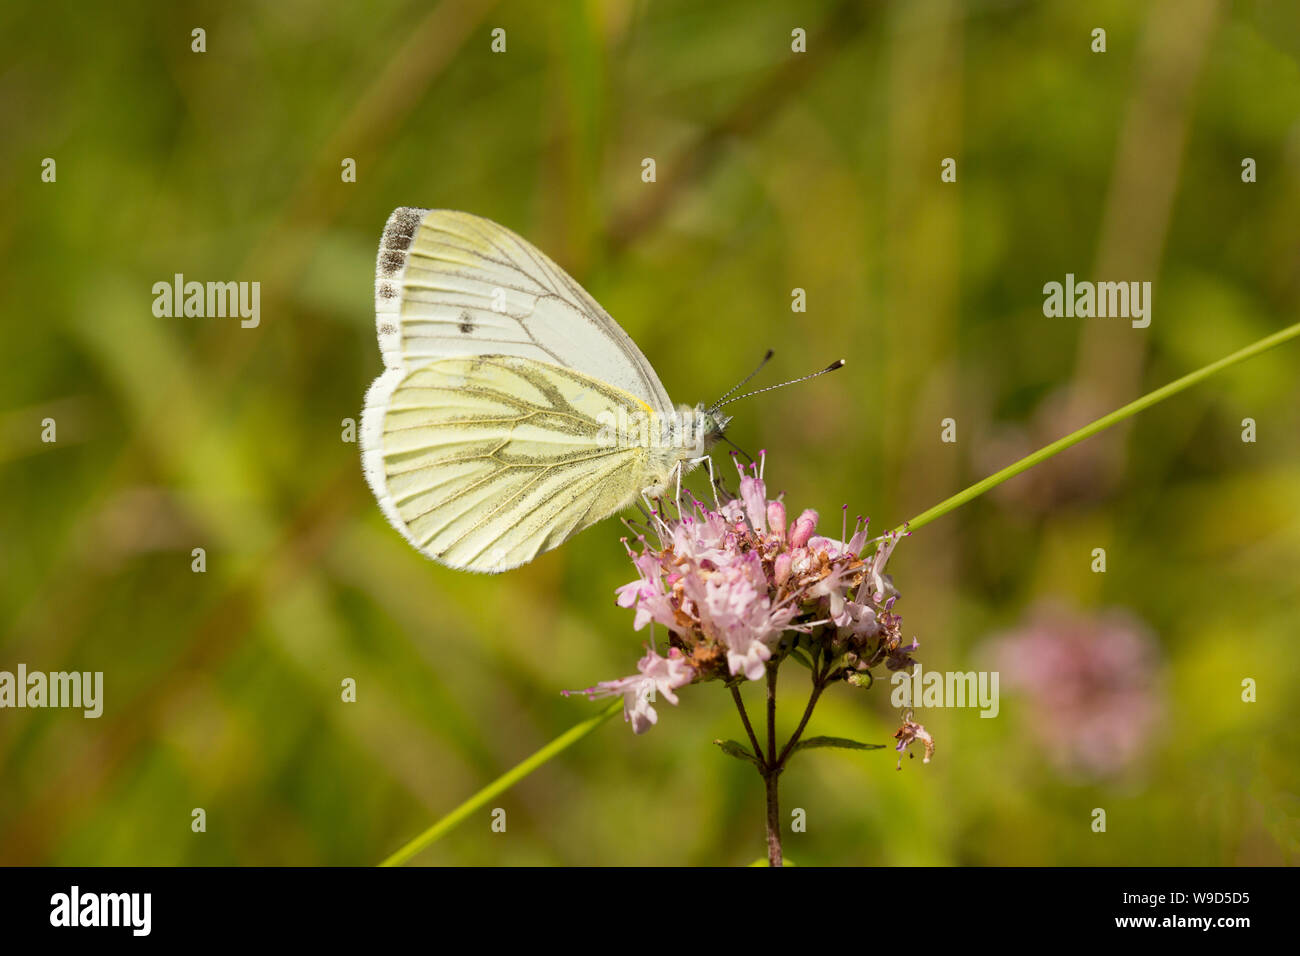 A Green-Veined White butterfly, Pieris napi, feeding next to a country lane on a sunny day. North Dorset England UK GB. Stock Photo